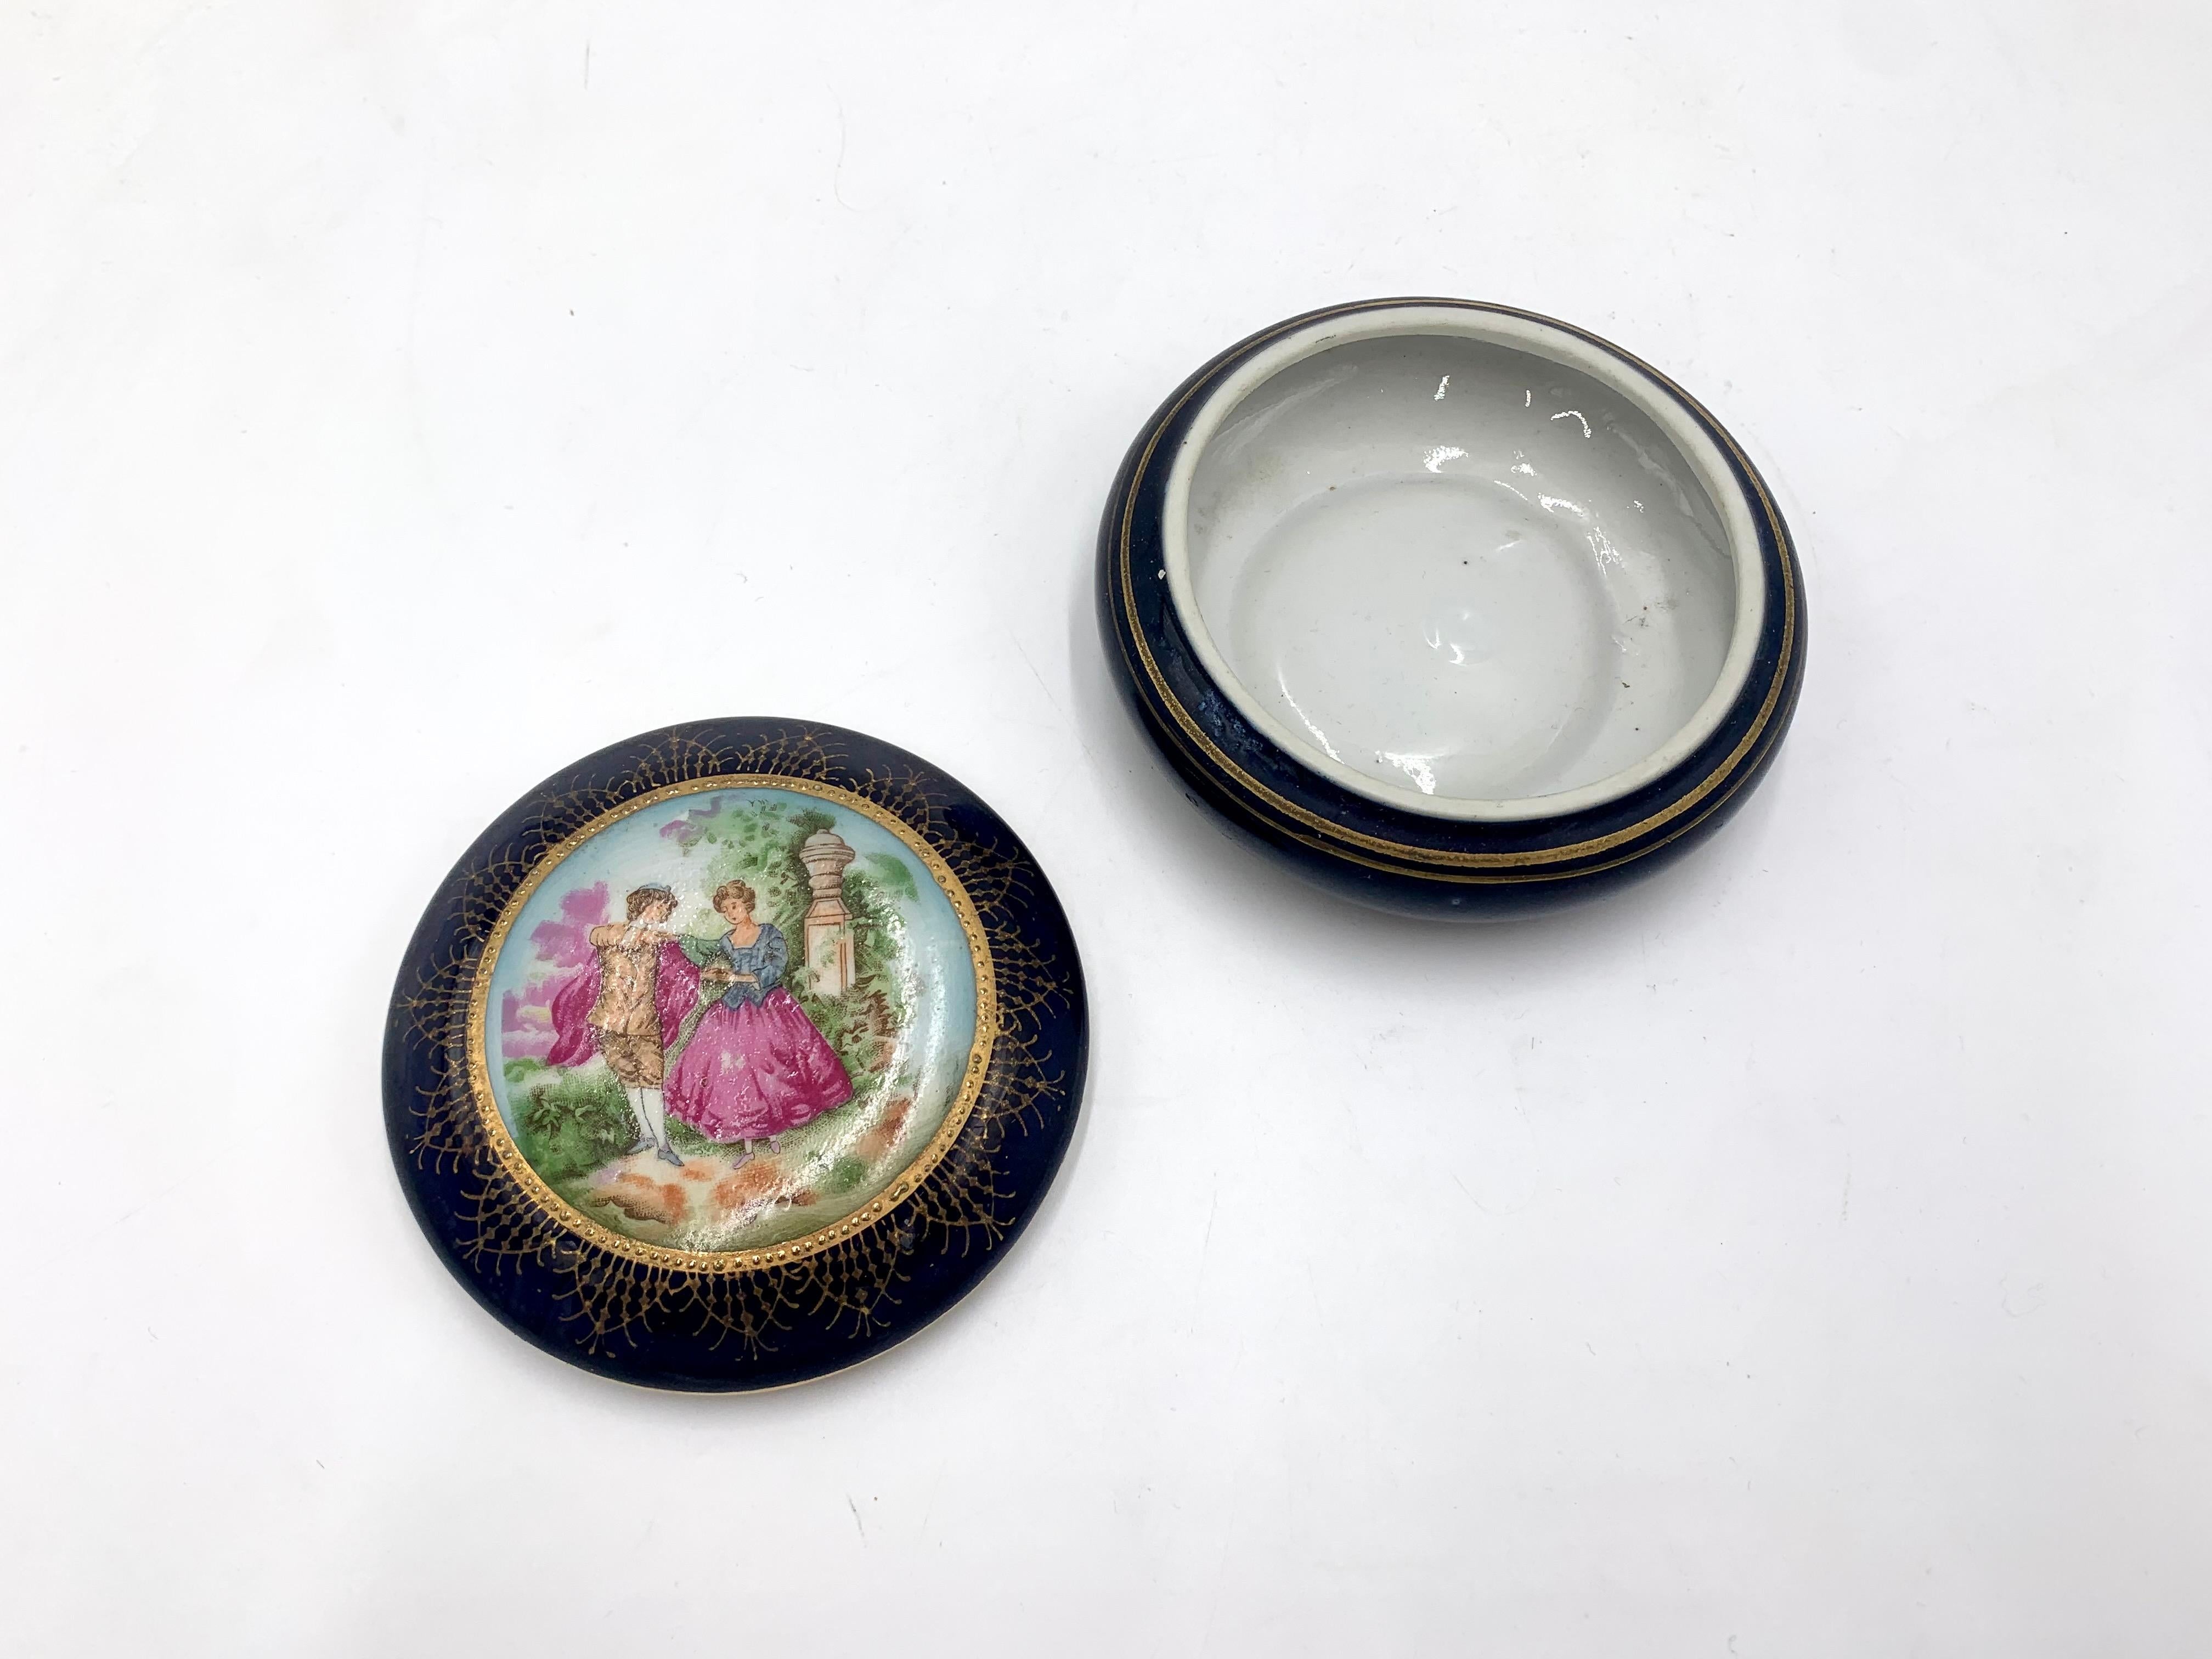 French Porcelain Casket with a Genre Scene For Sale